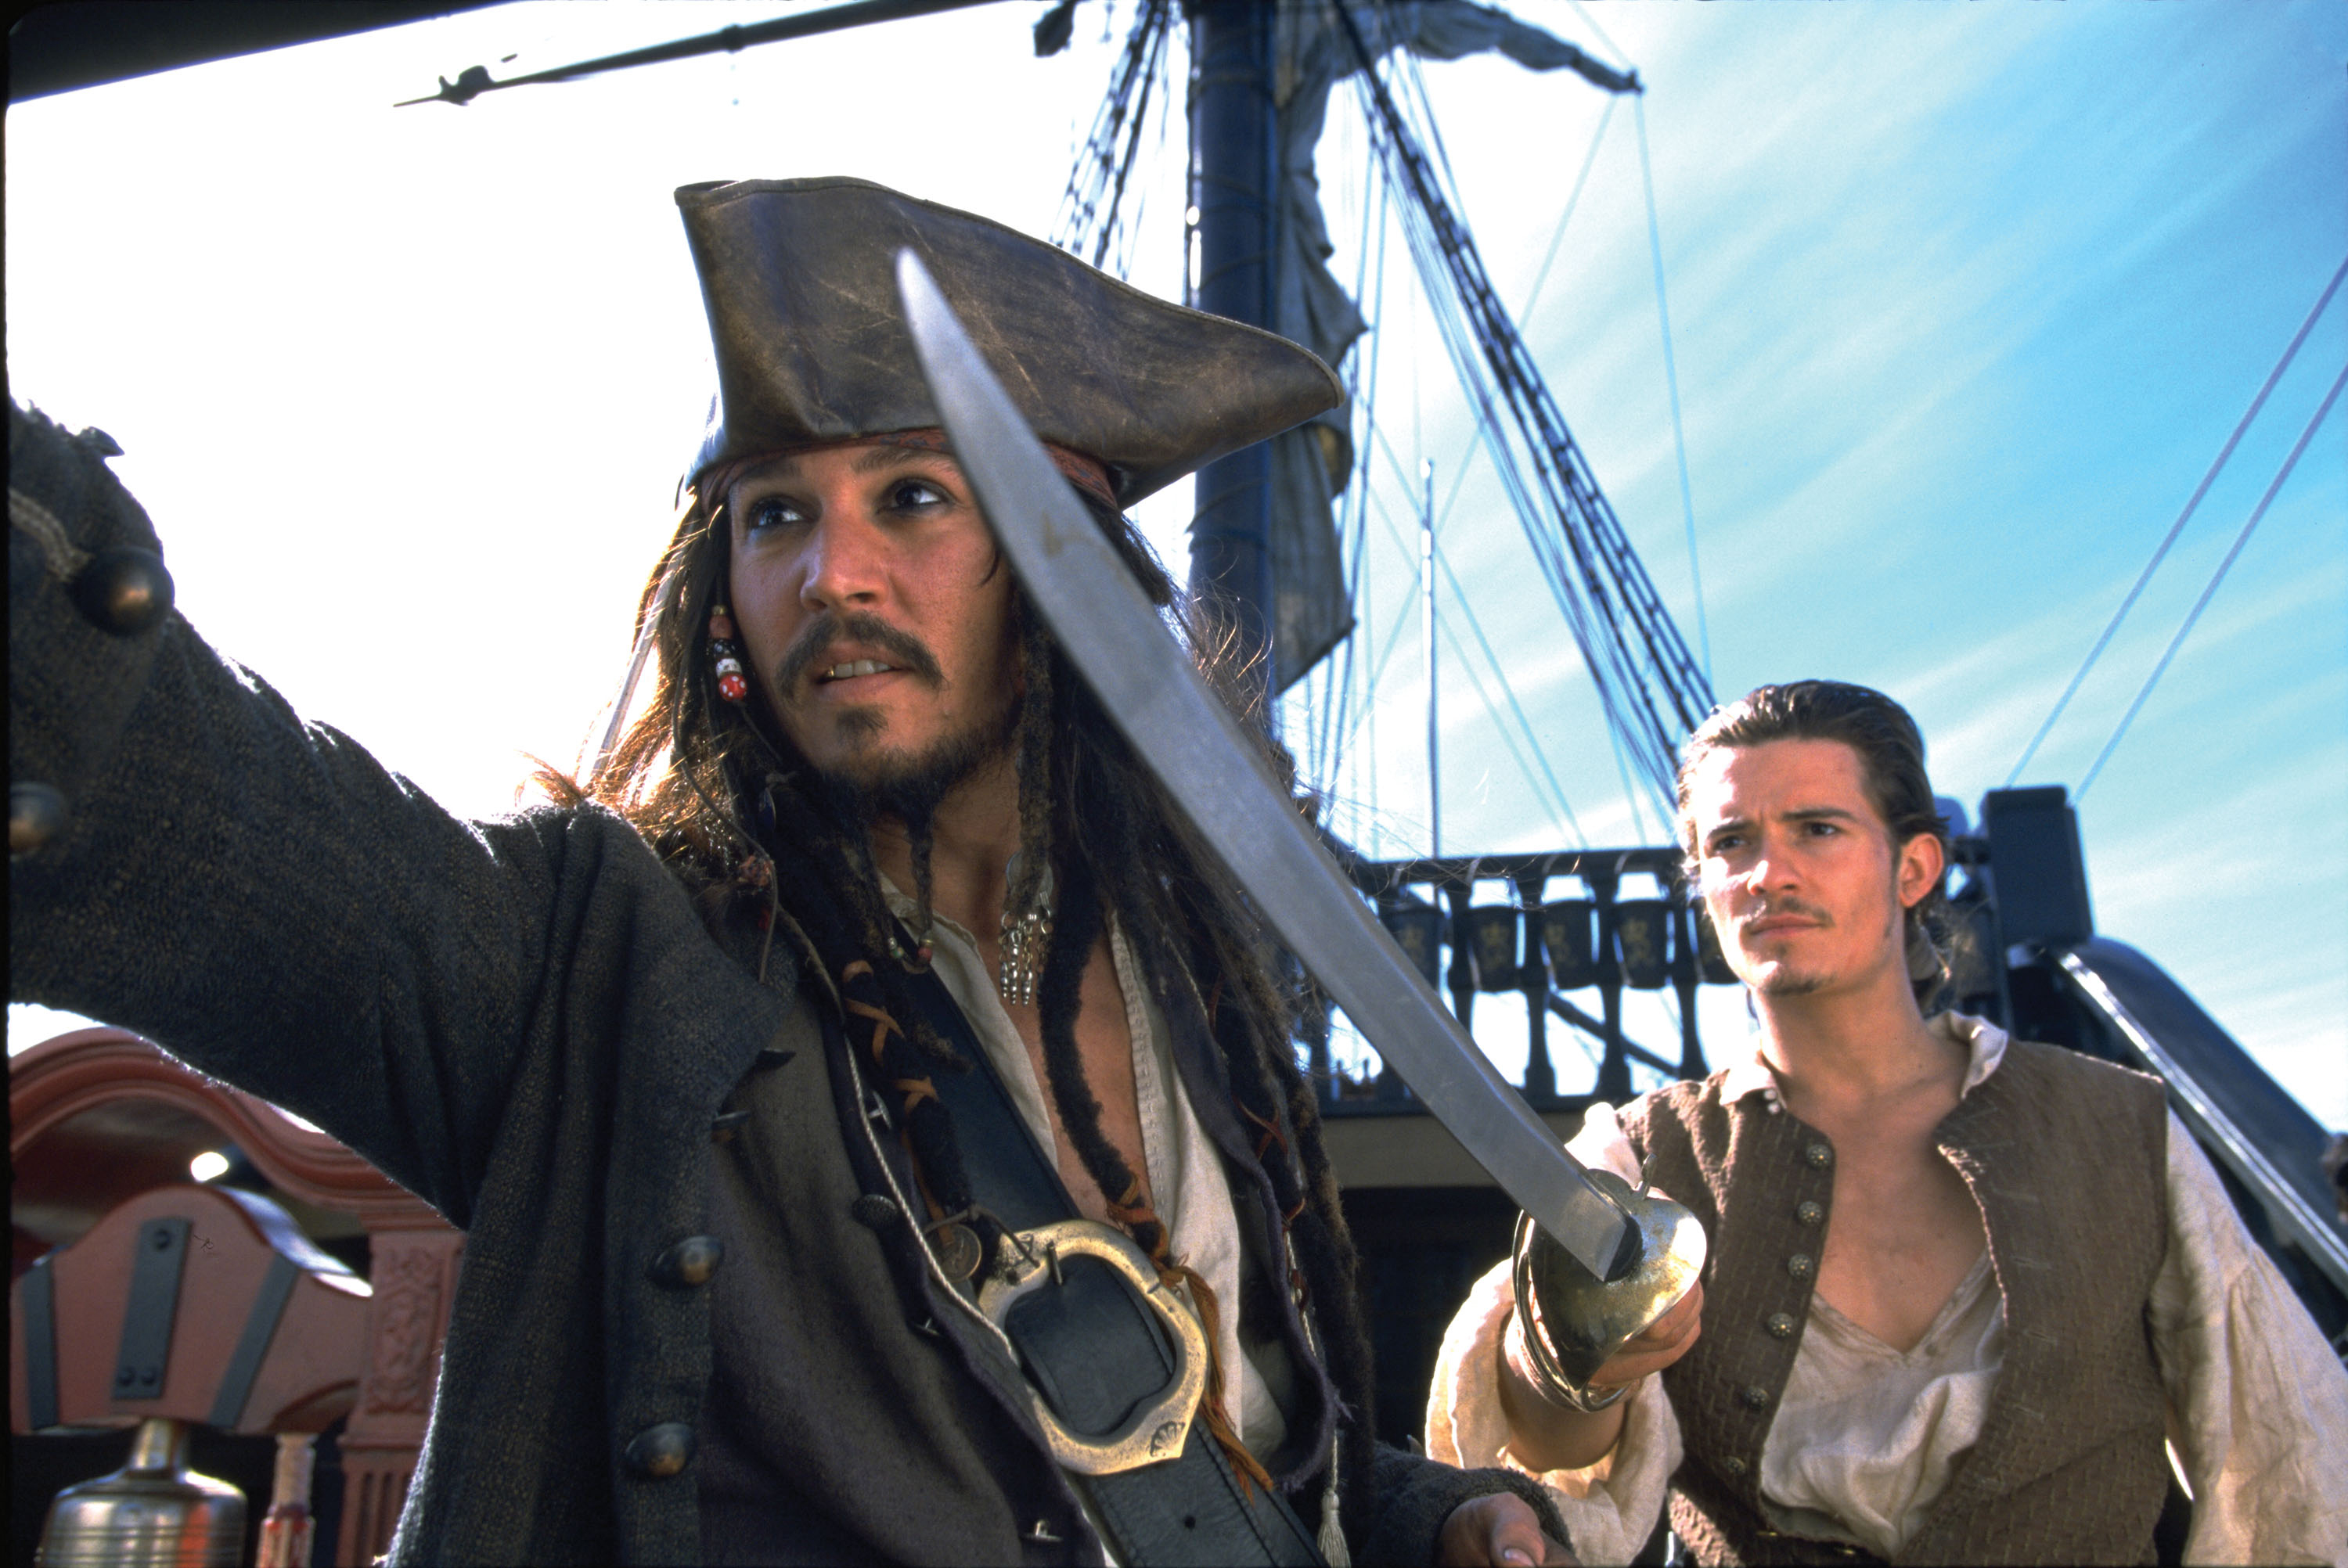 johnny depp, jack sparrow, movie, pirates of the caribbean: the curse of the black pearl, orlando bloom, will turner, pirates of the caribbean